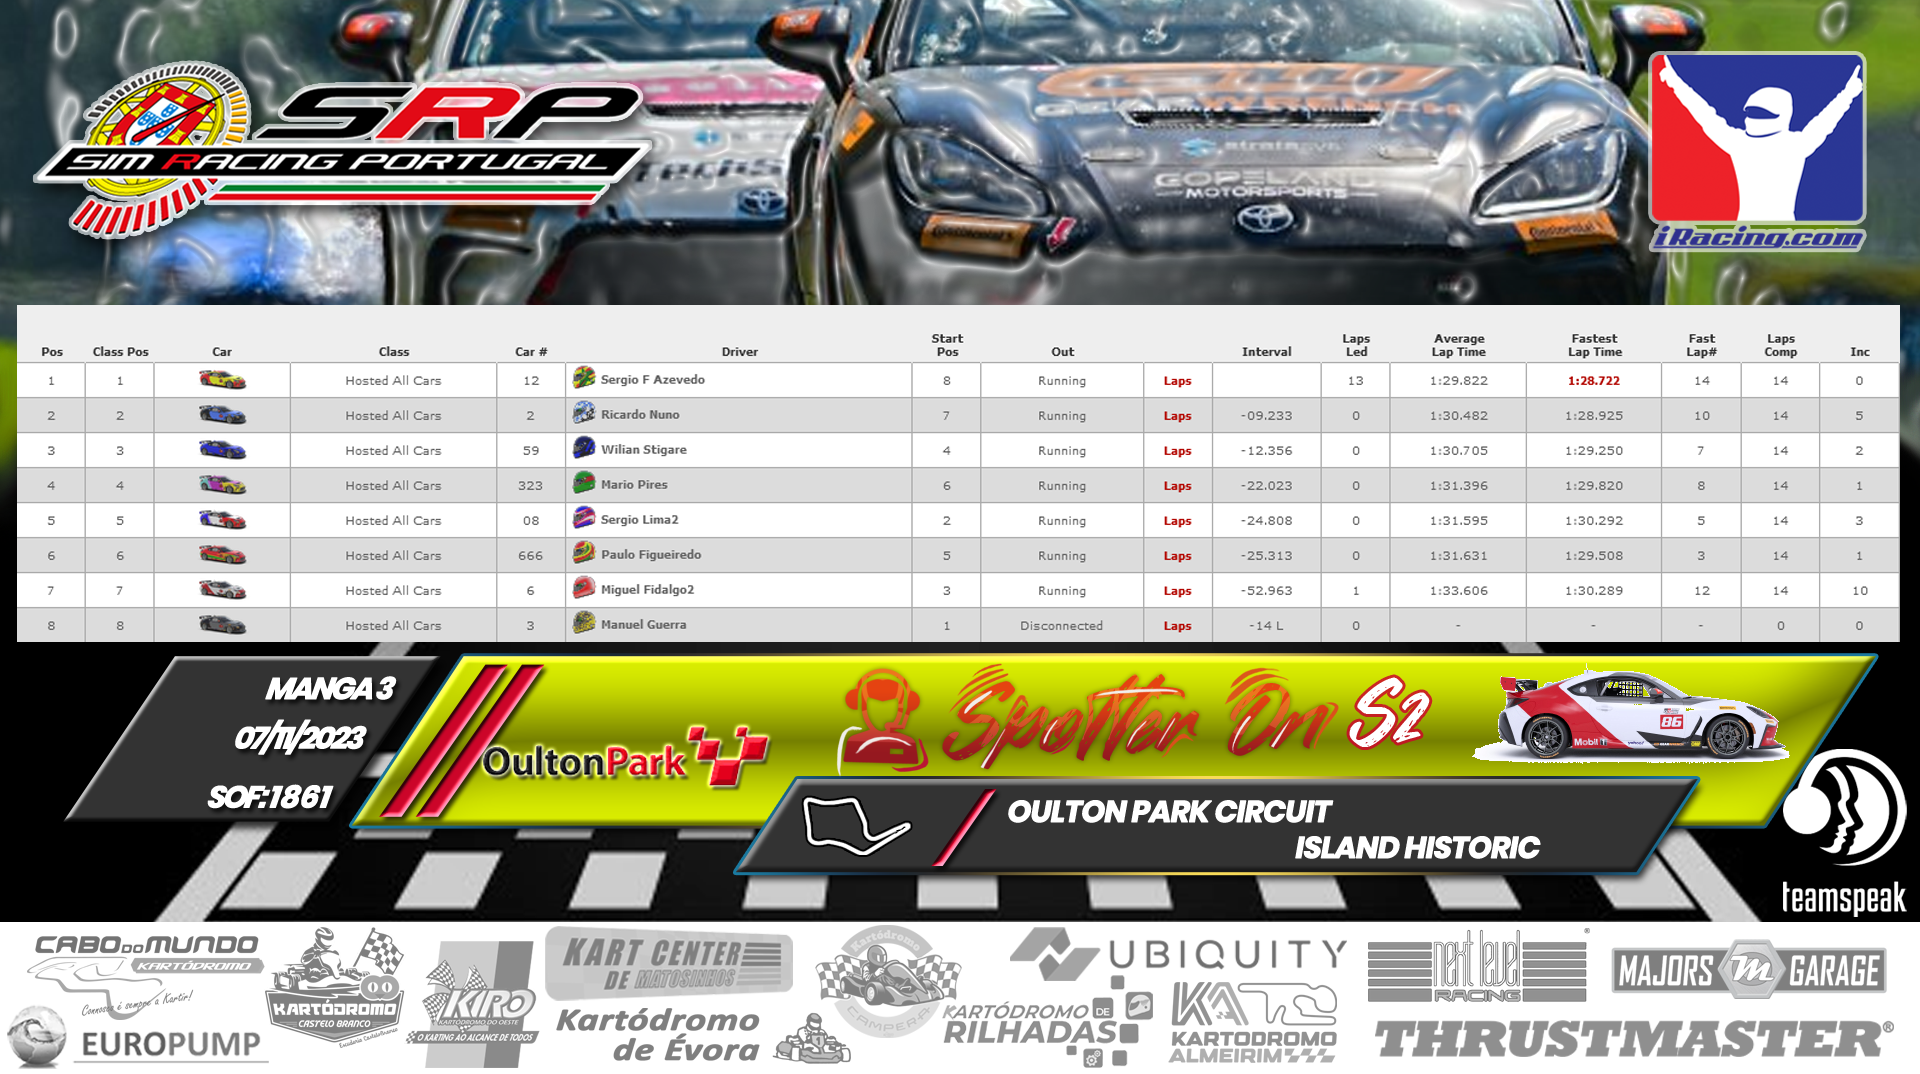 [Image: RaceResults-SpotterOnS2-3-1.png]